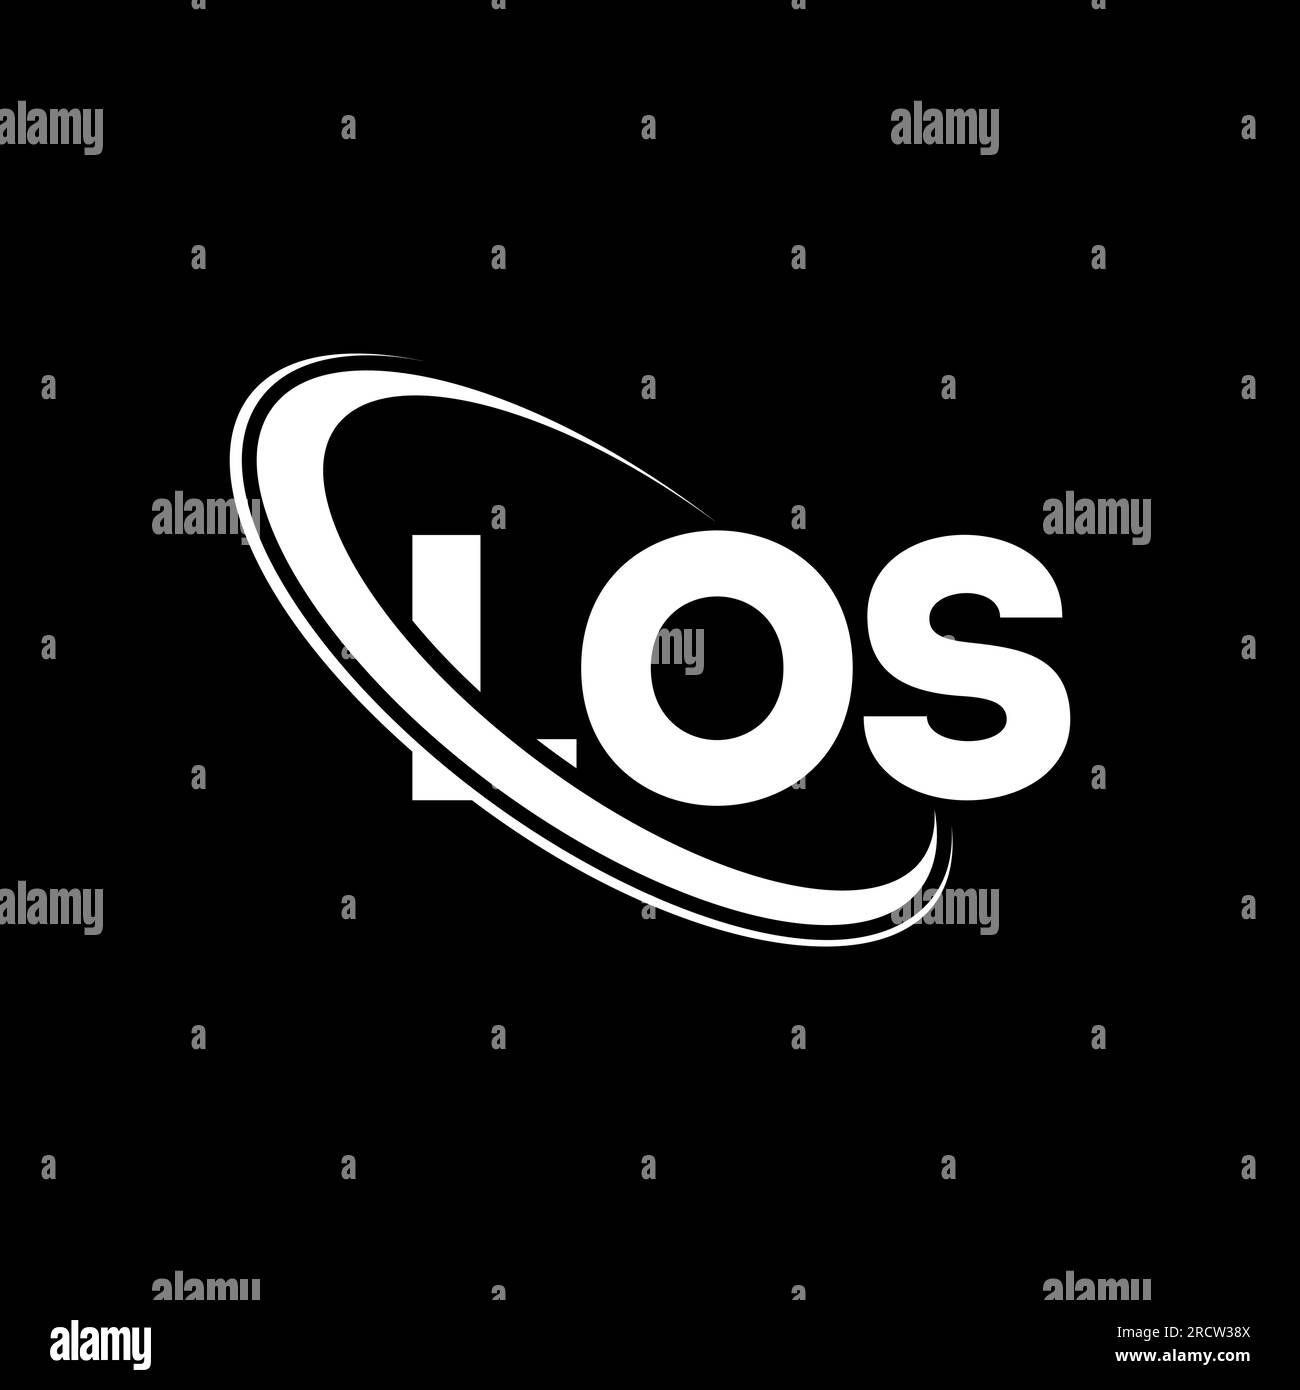 LOS logo. LOS letter. LOS letter logo design. Initials LOS logo linked with circle and uppercase monogram logo. LOS typography for technology, busines Stock Vector